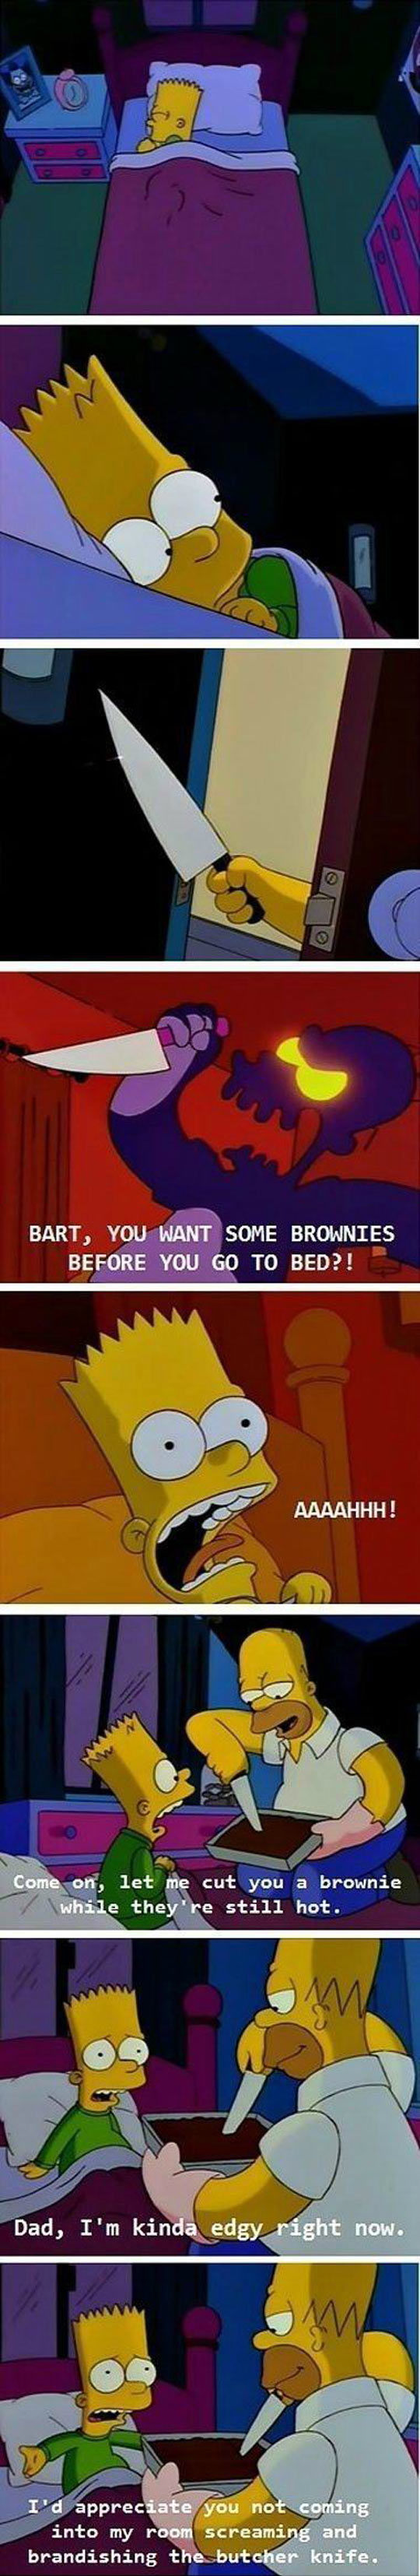 I Miss The Old Simpsons